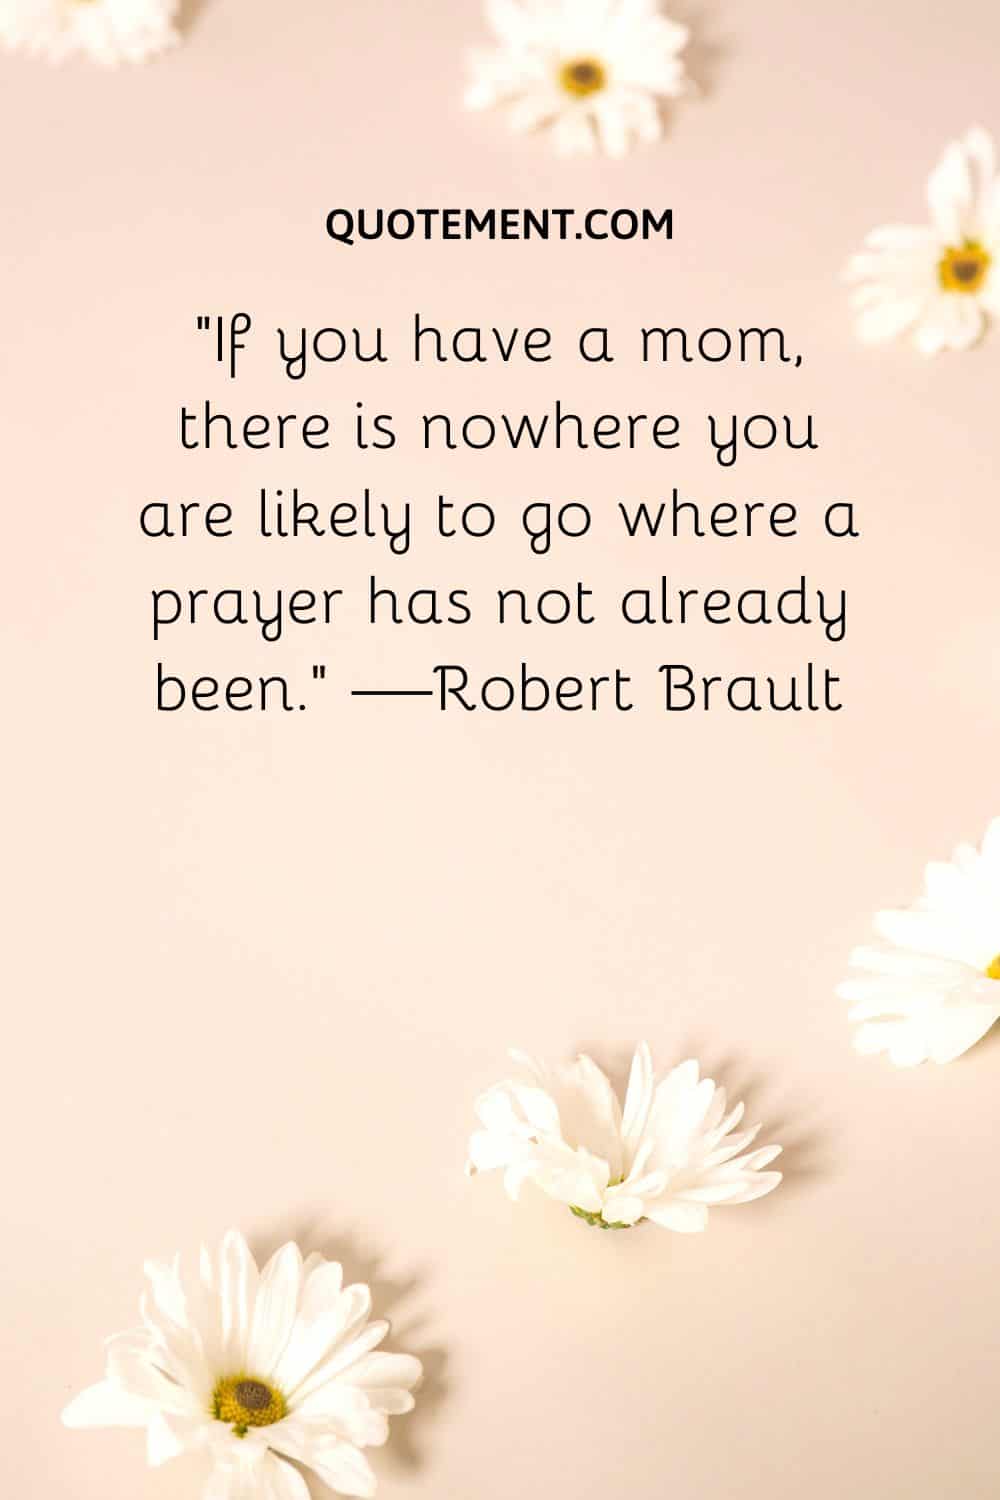 If you have a mom, there is nowhere you are likely to go where a prayer has not already been.